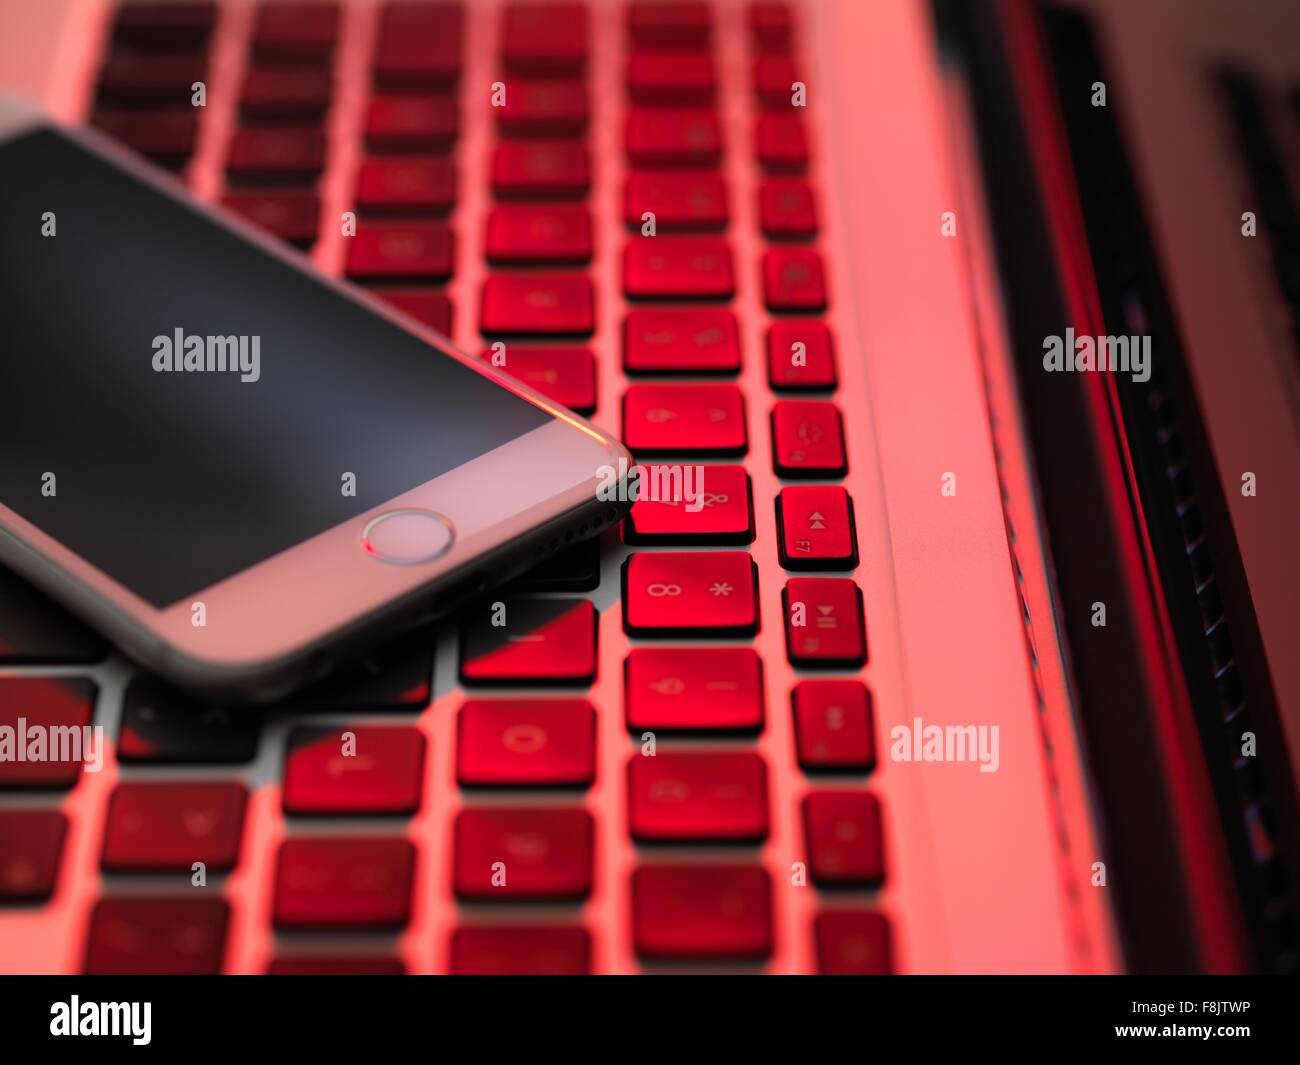 High angle view of cellular phone on computer keyboard in red lighting Stock Photo